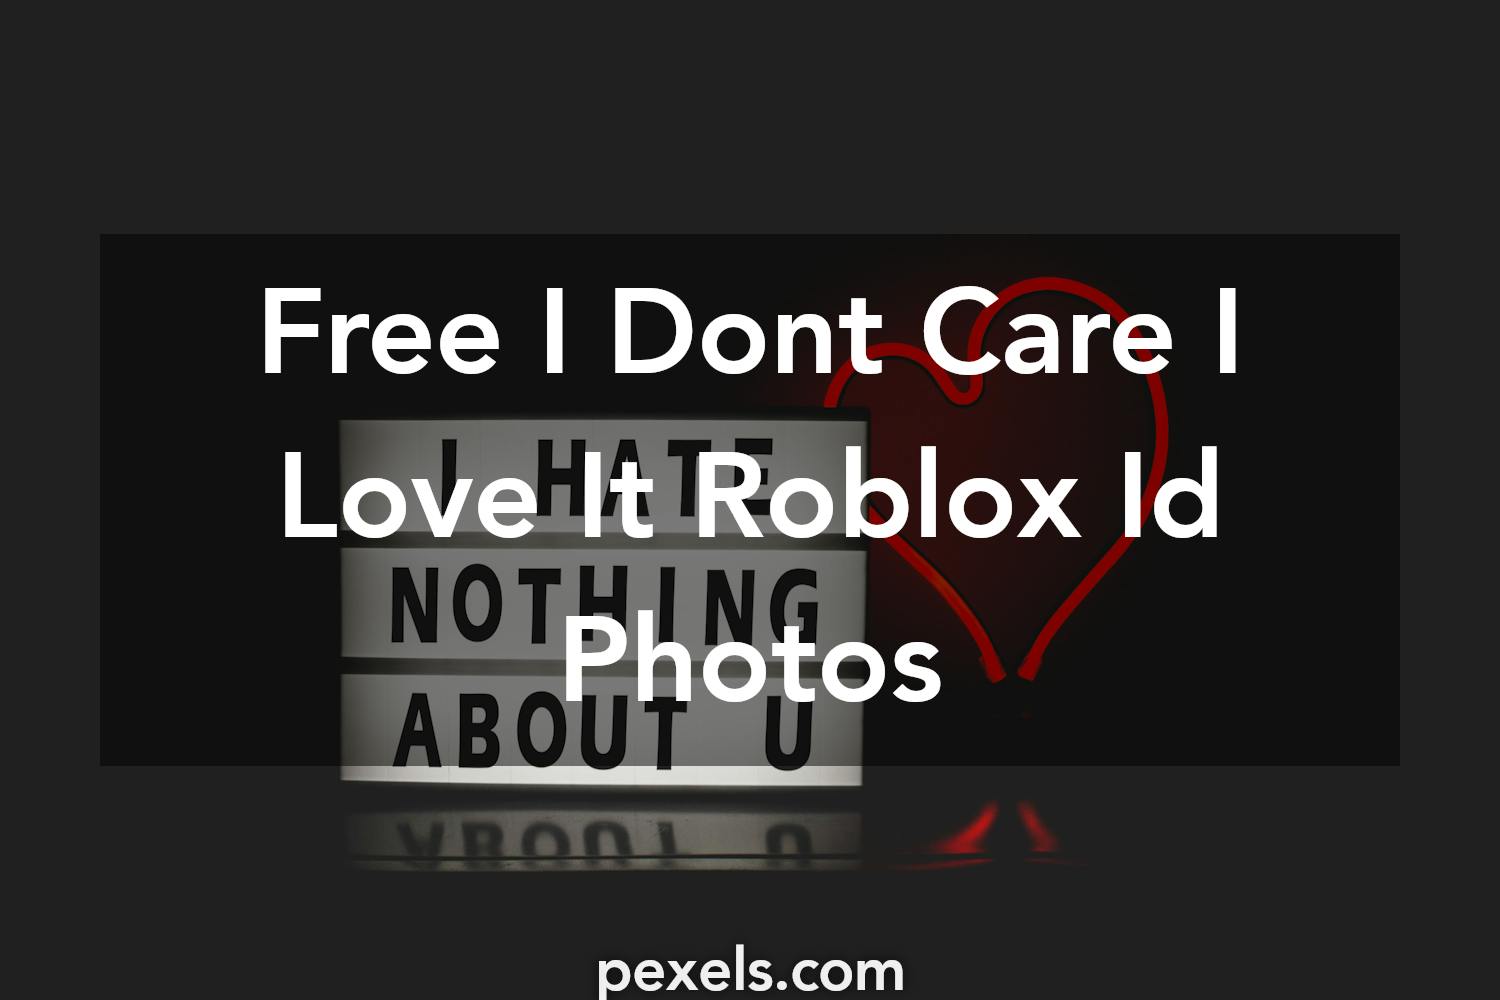 1000 Roblox Ids - videos matching old town road roblox id revolvy